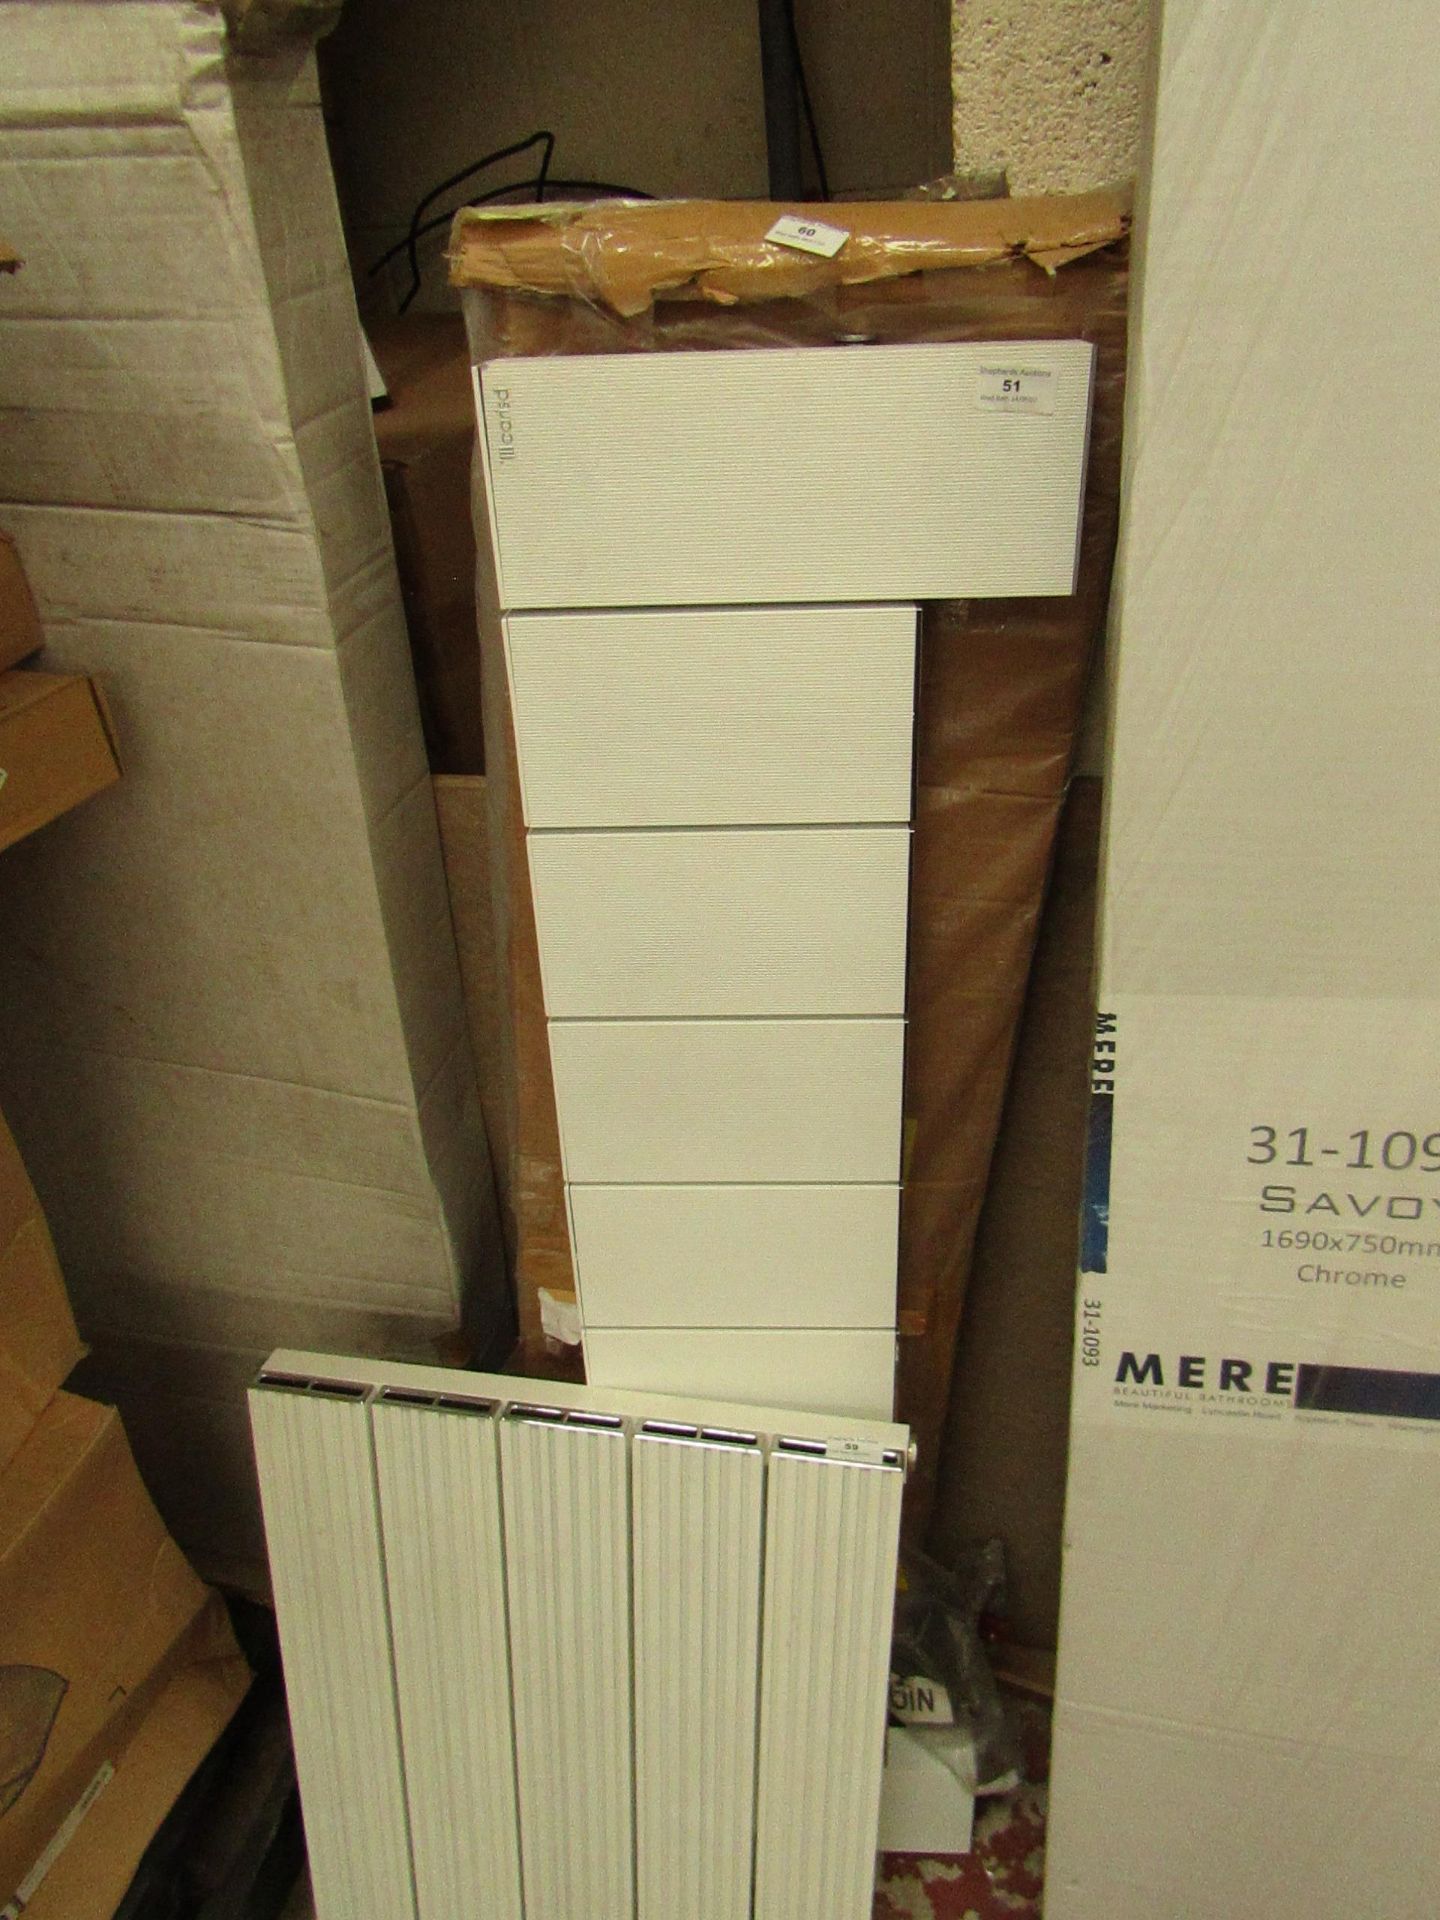 Carisa Elvino white radiator 1245x300, untested and damaged at one end.